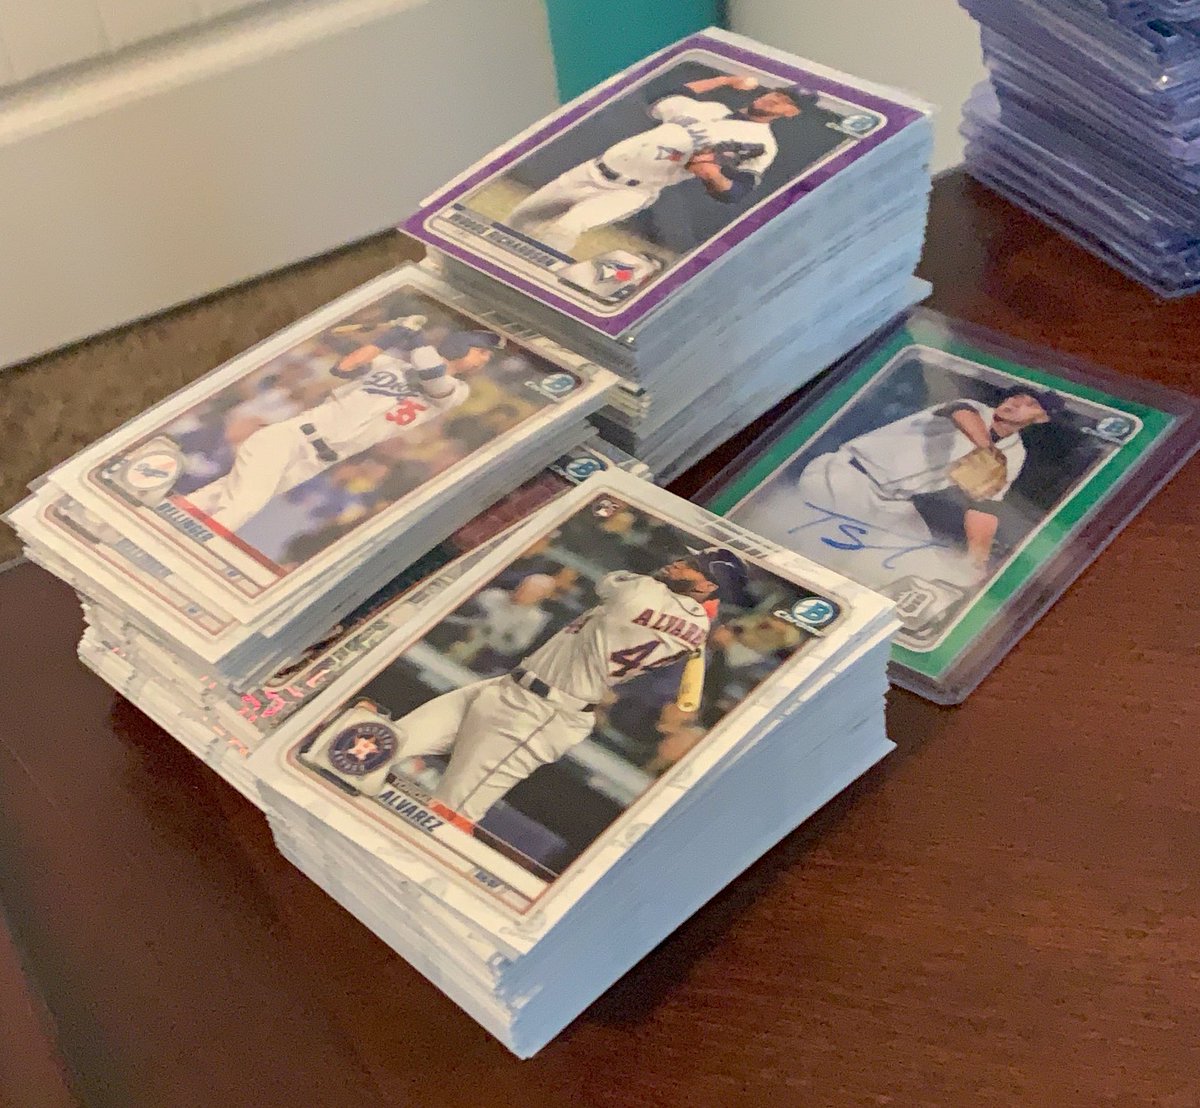 Planning to put up a bowman chrome sell tonight at 7 pm CT. Cards from $1-$25. Would like to move as much as possible!  @HobbyConnector  @Hobby_Connect